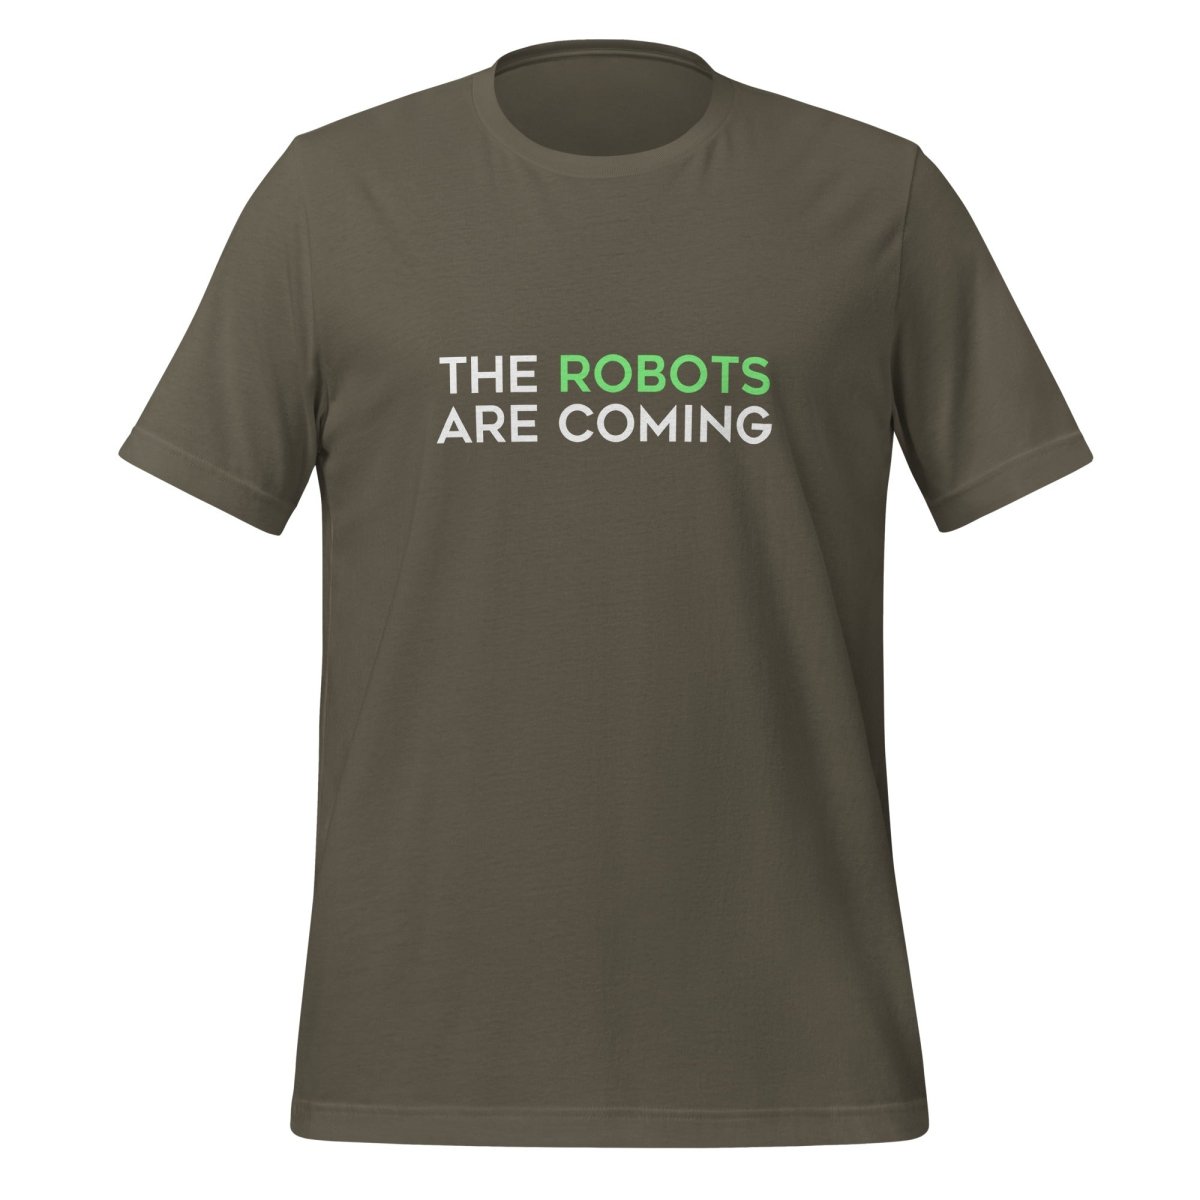 The Robots Are Coming (Green) T - Shirt 1 (unisex) - Army - AI Store